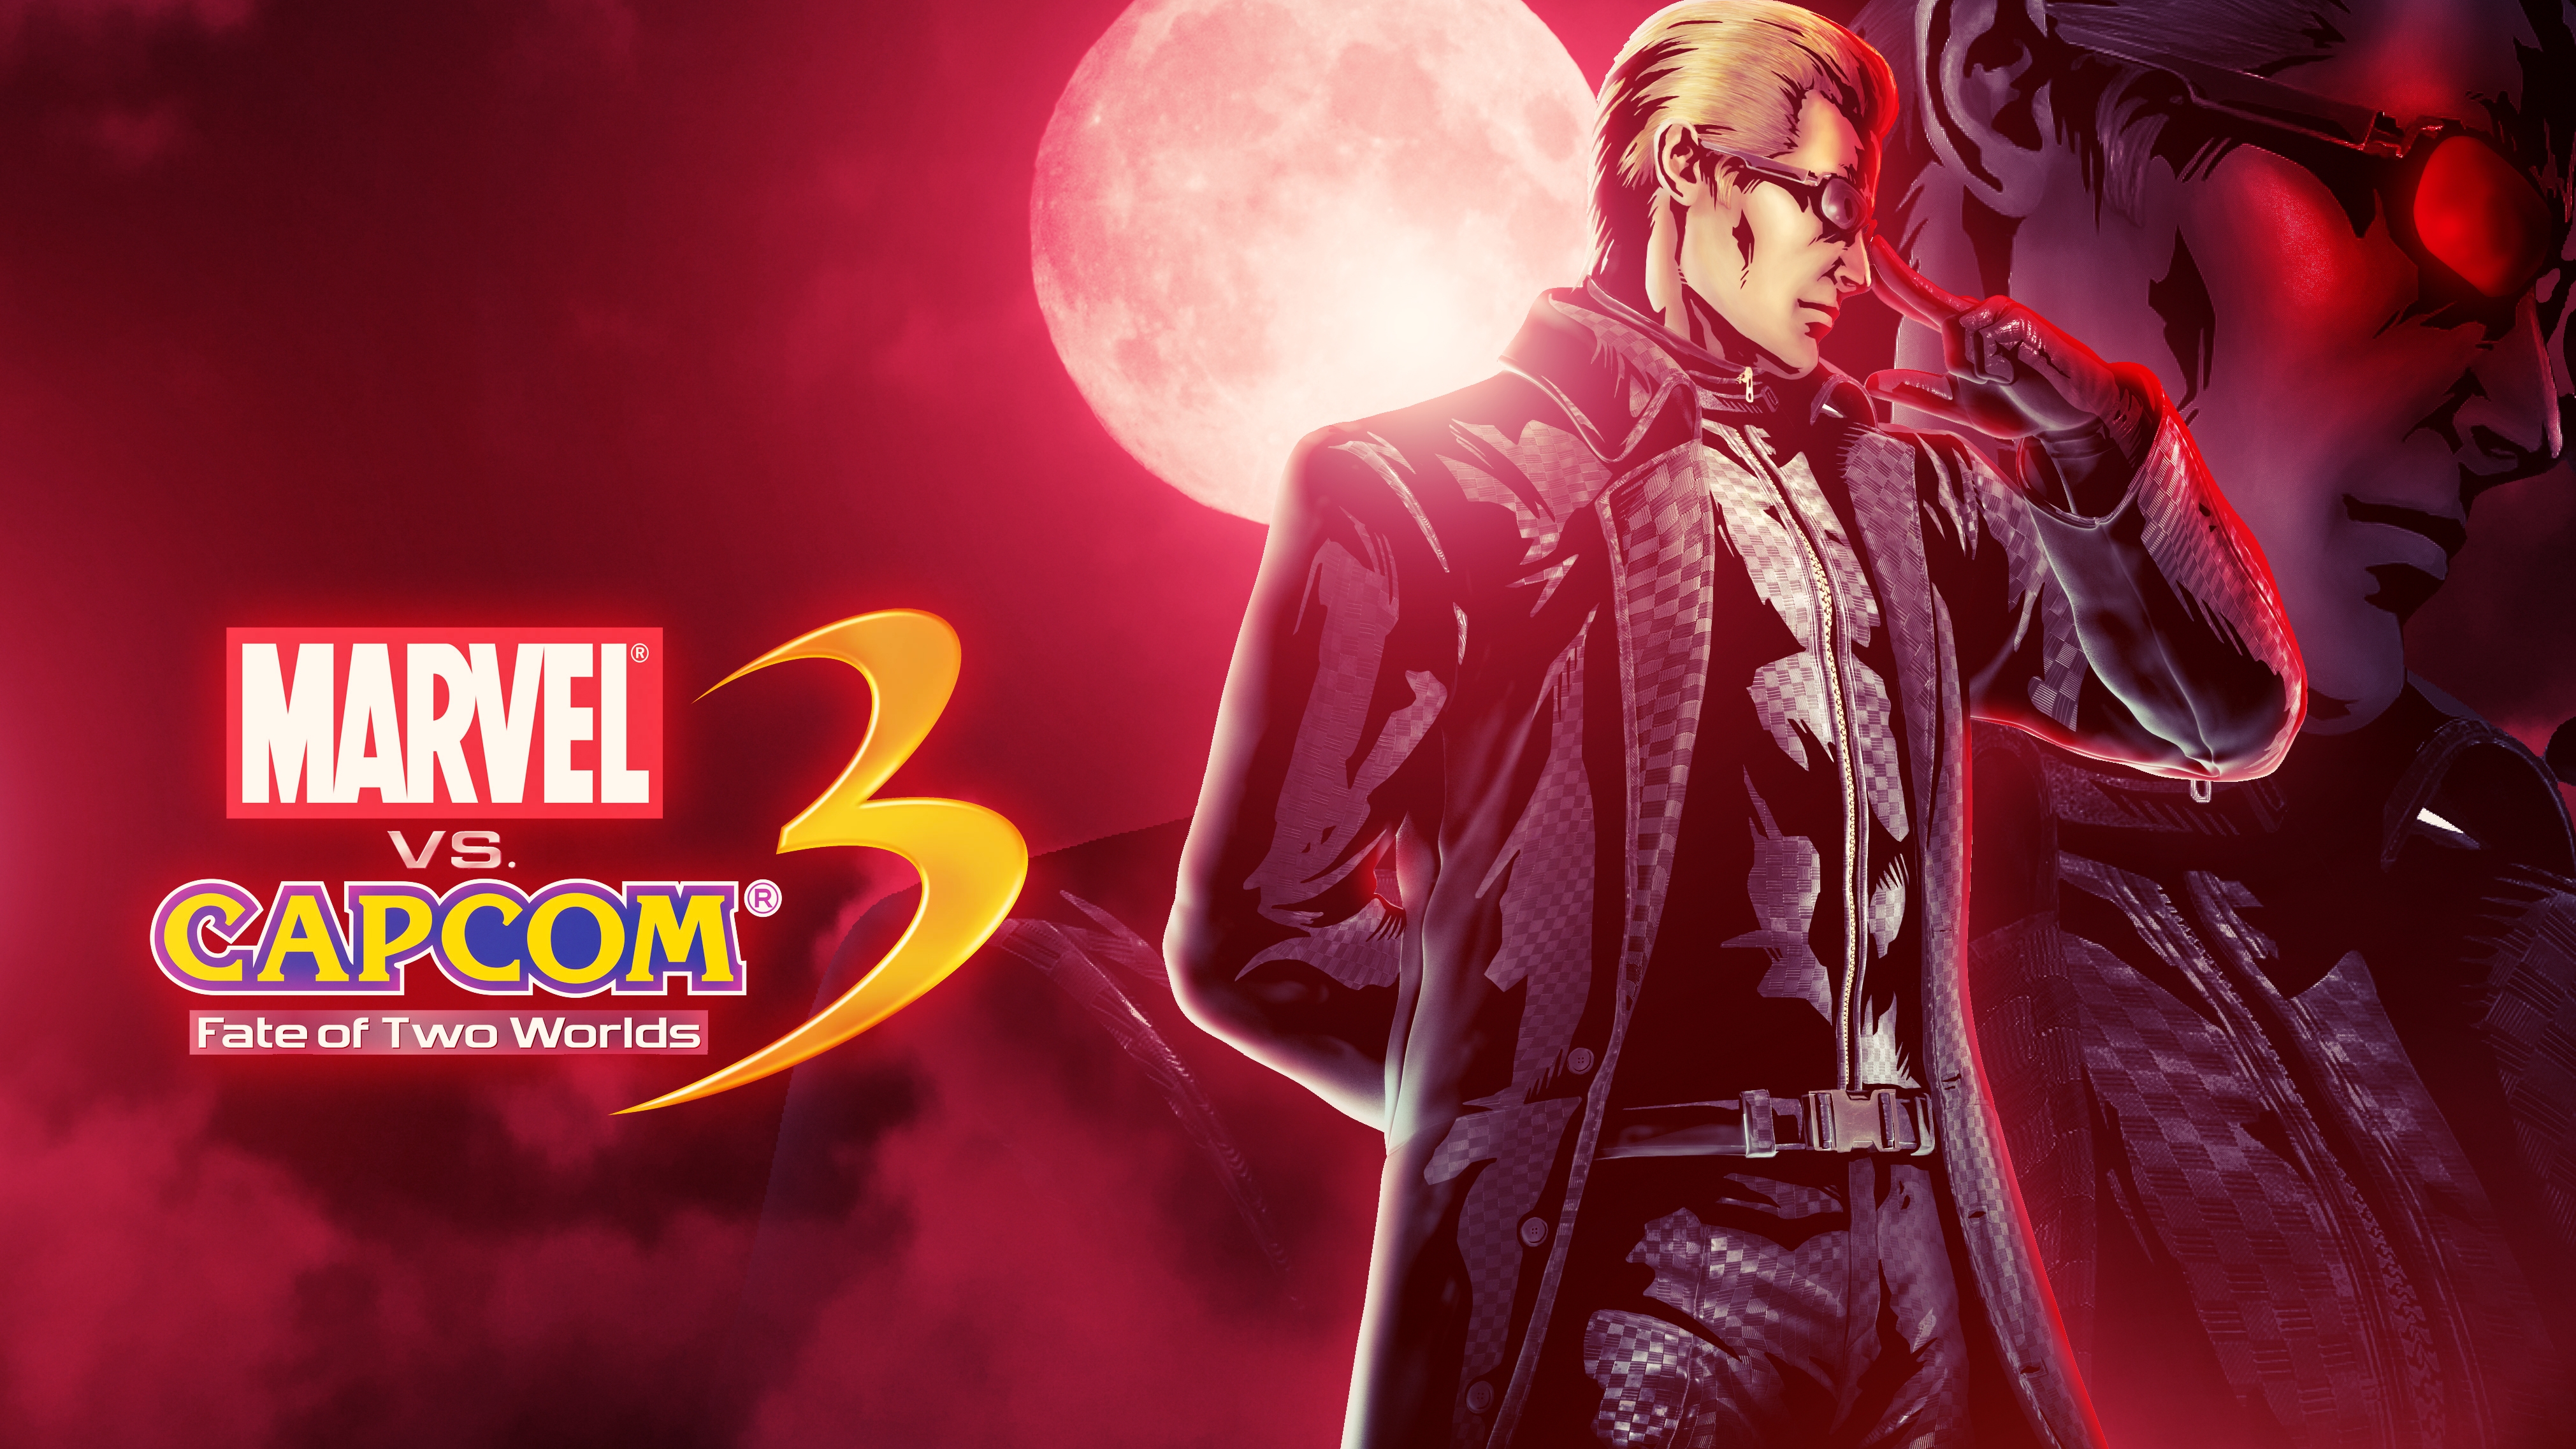 Video Game Marvel vs. Capcom 3: Fate of Two Worlds HD Wallpaper | Background Image